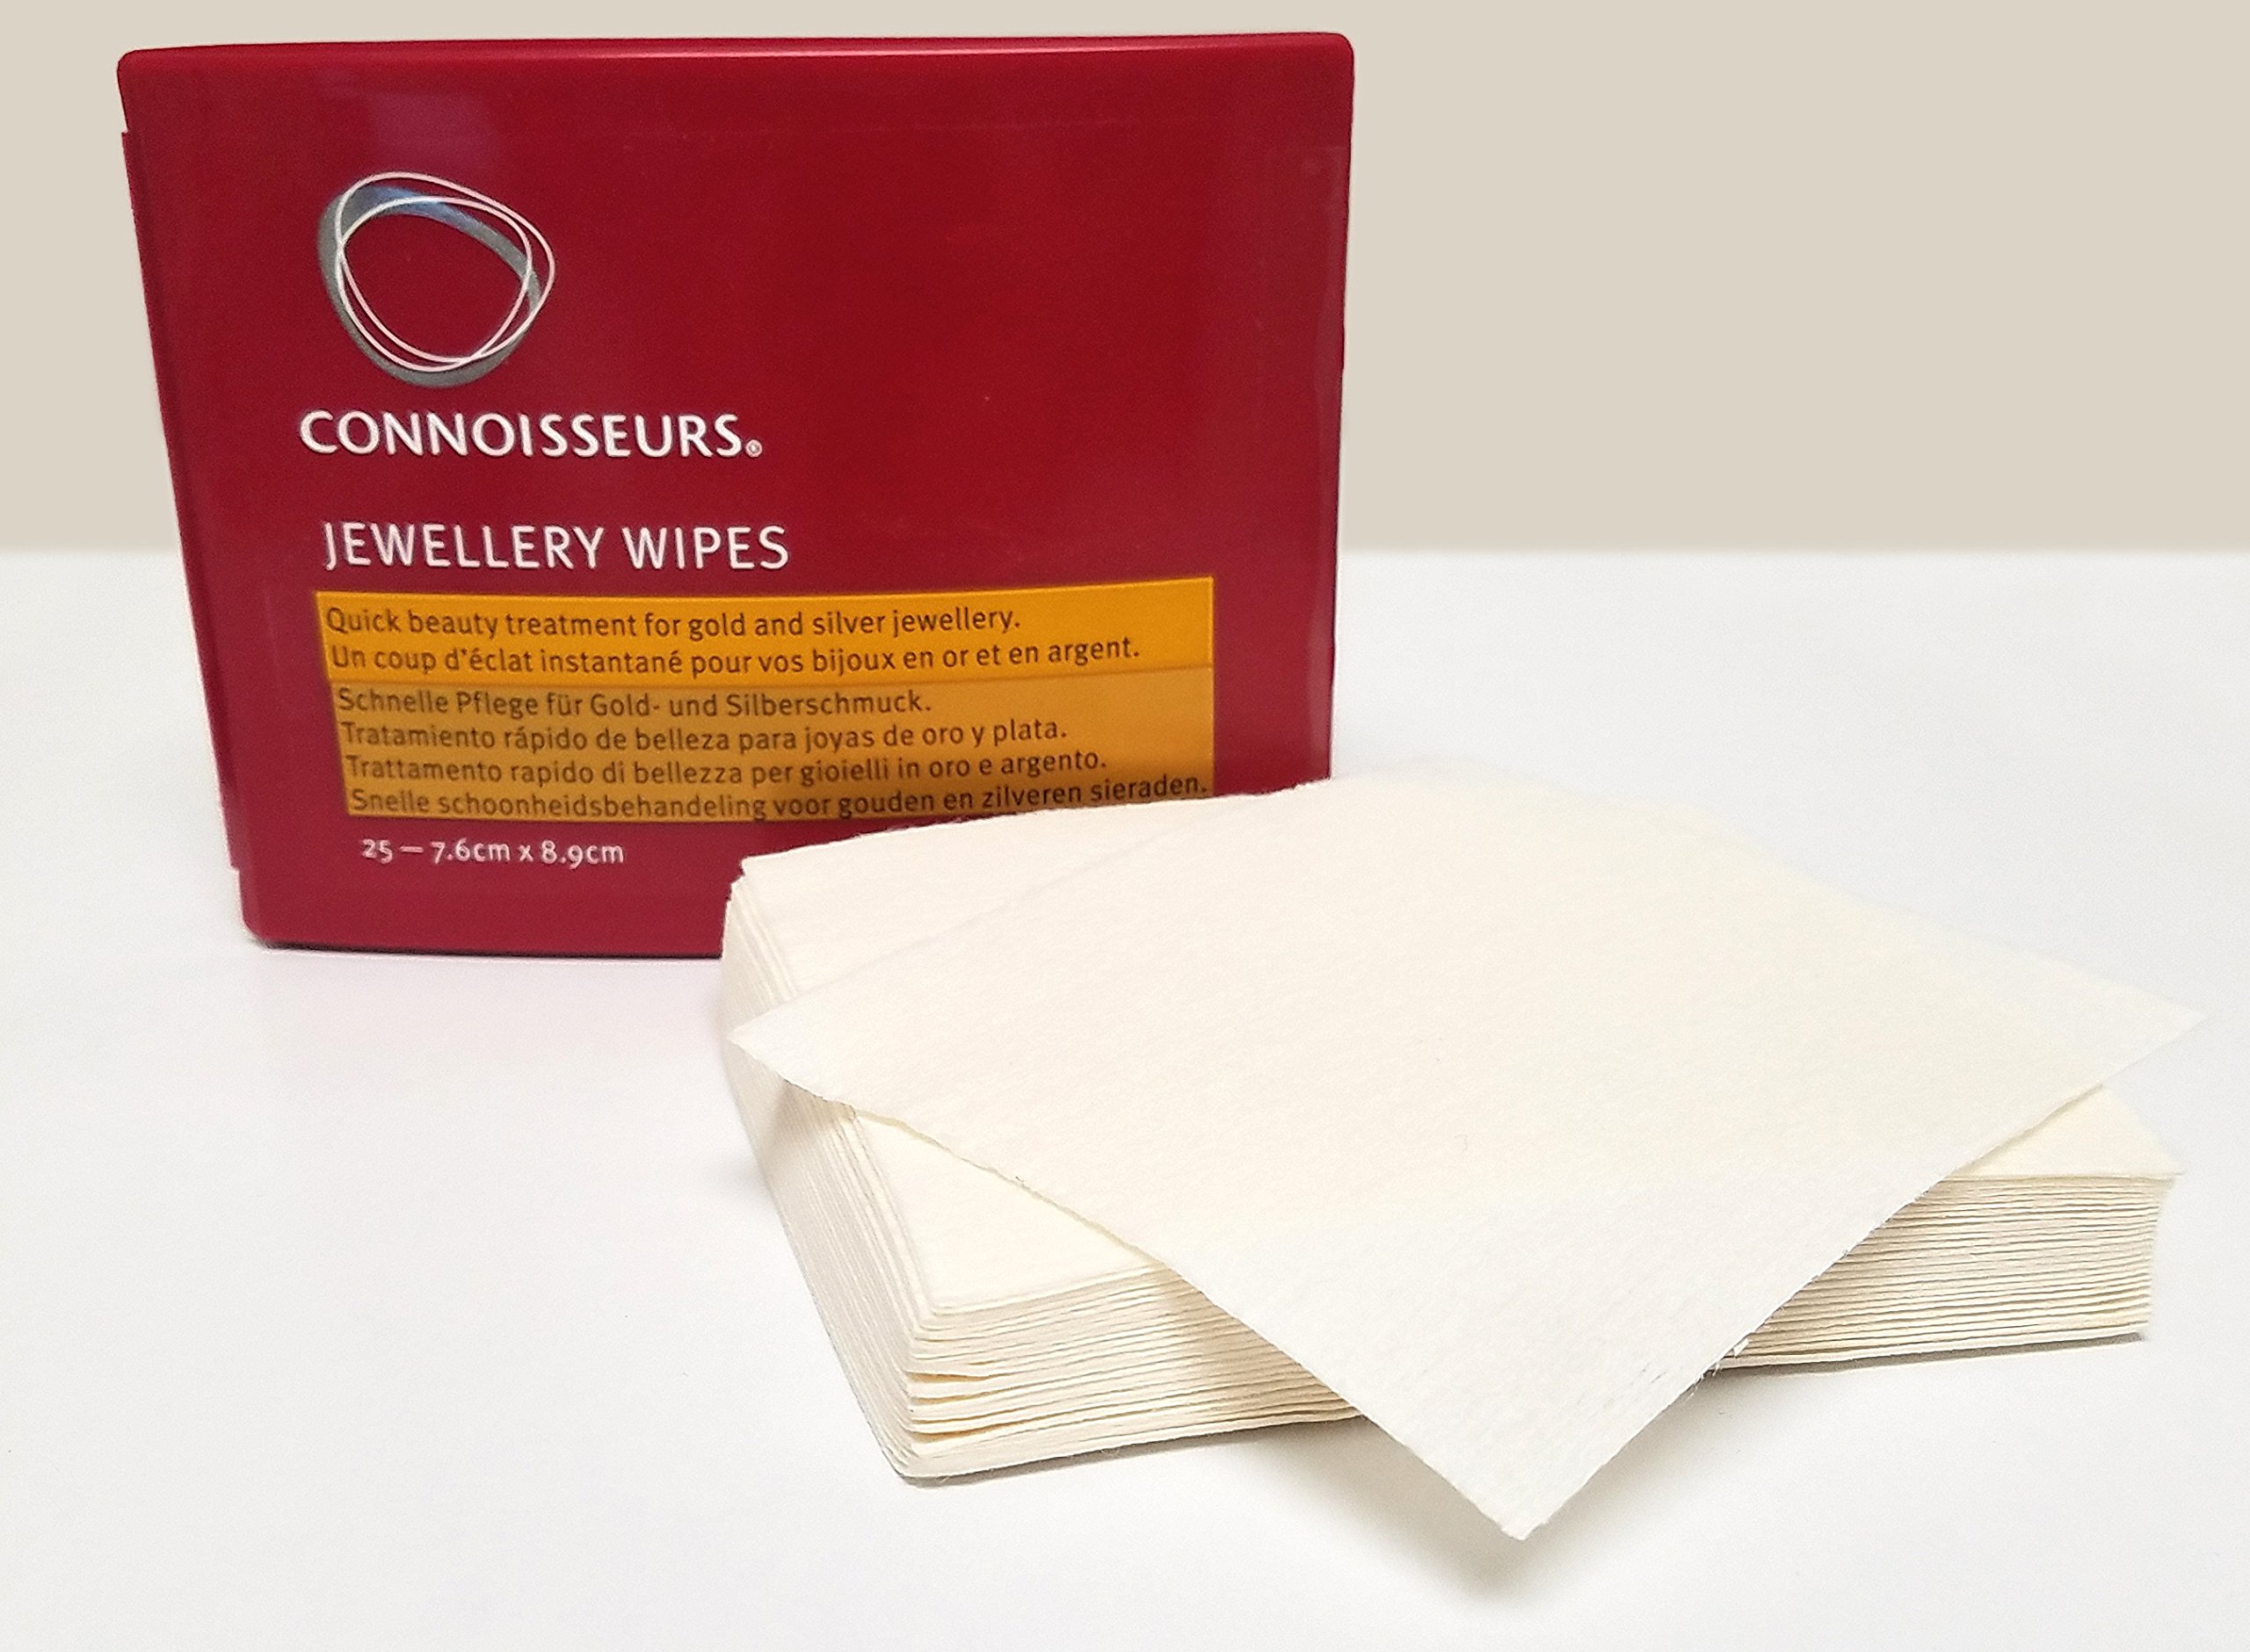 Connoisseurs Jewellery Wipes | 25 Jewellery Cleaning Wipes for Gold & Silver Jewellery | Anti-Tarnish Protective Shield | Dry, Disposable & Non-Toxic